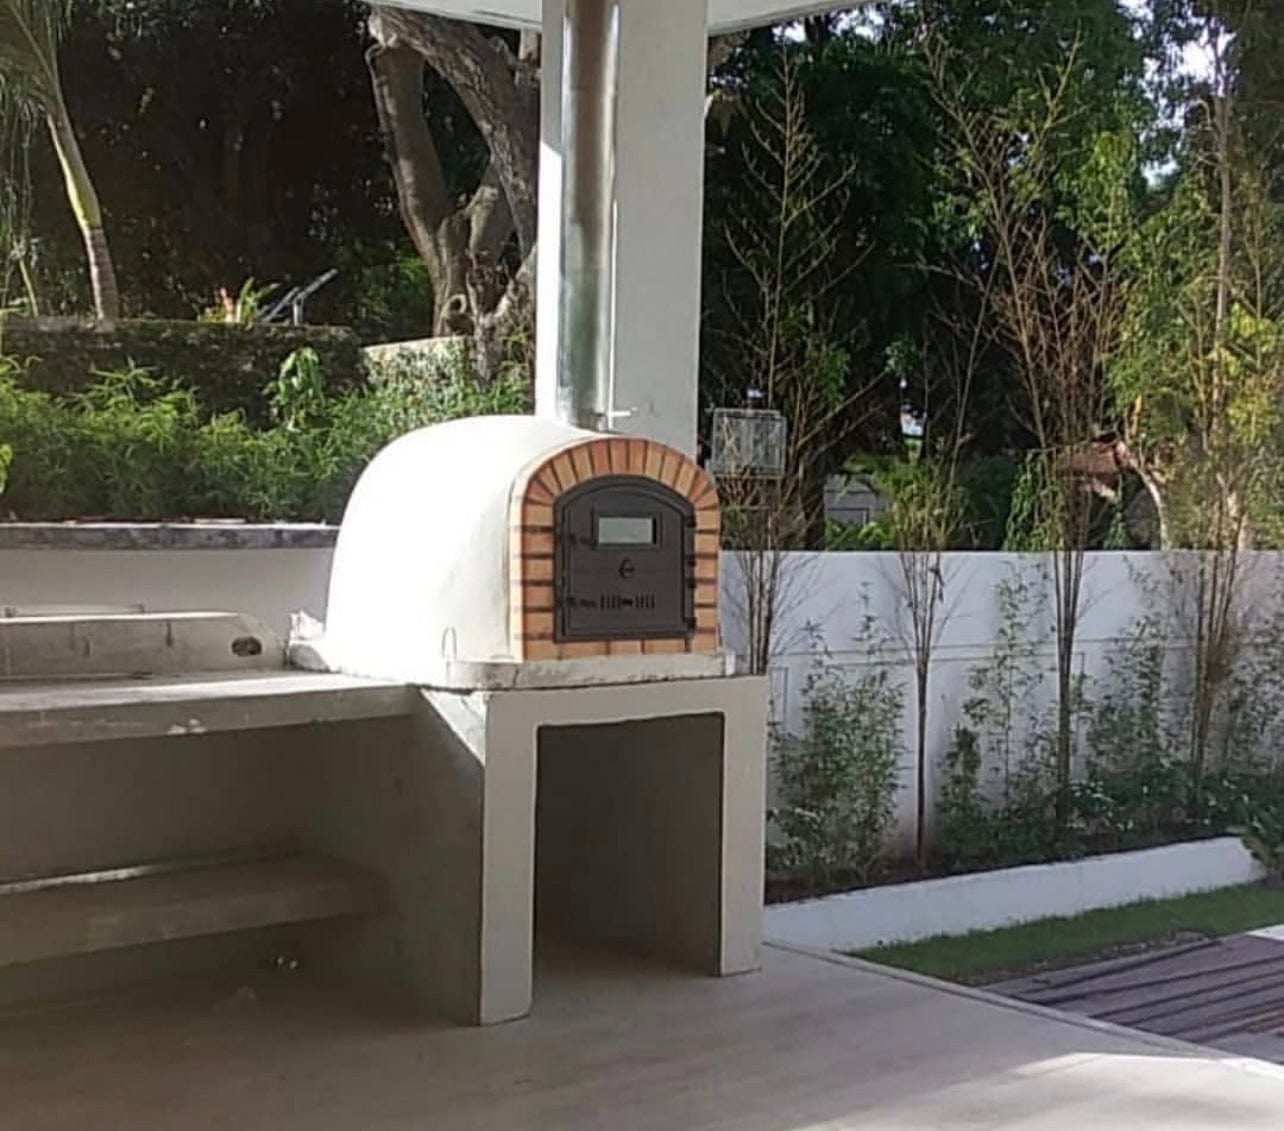 Authentic Pizza Ovens Traditional Brick Lisboa Wood Fire Oven